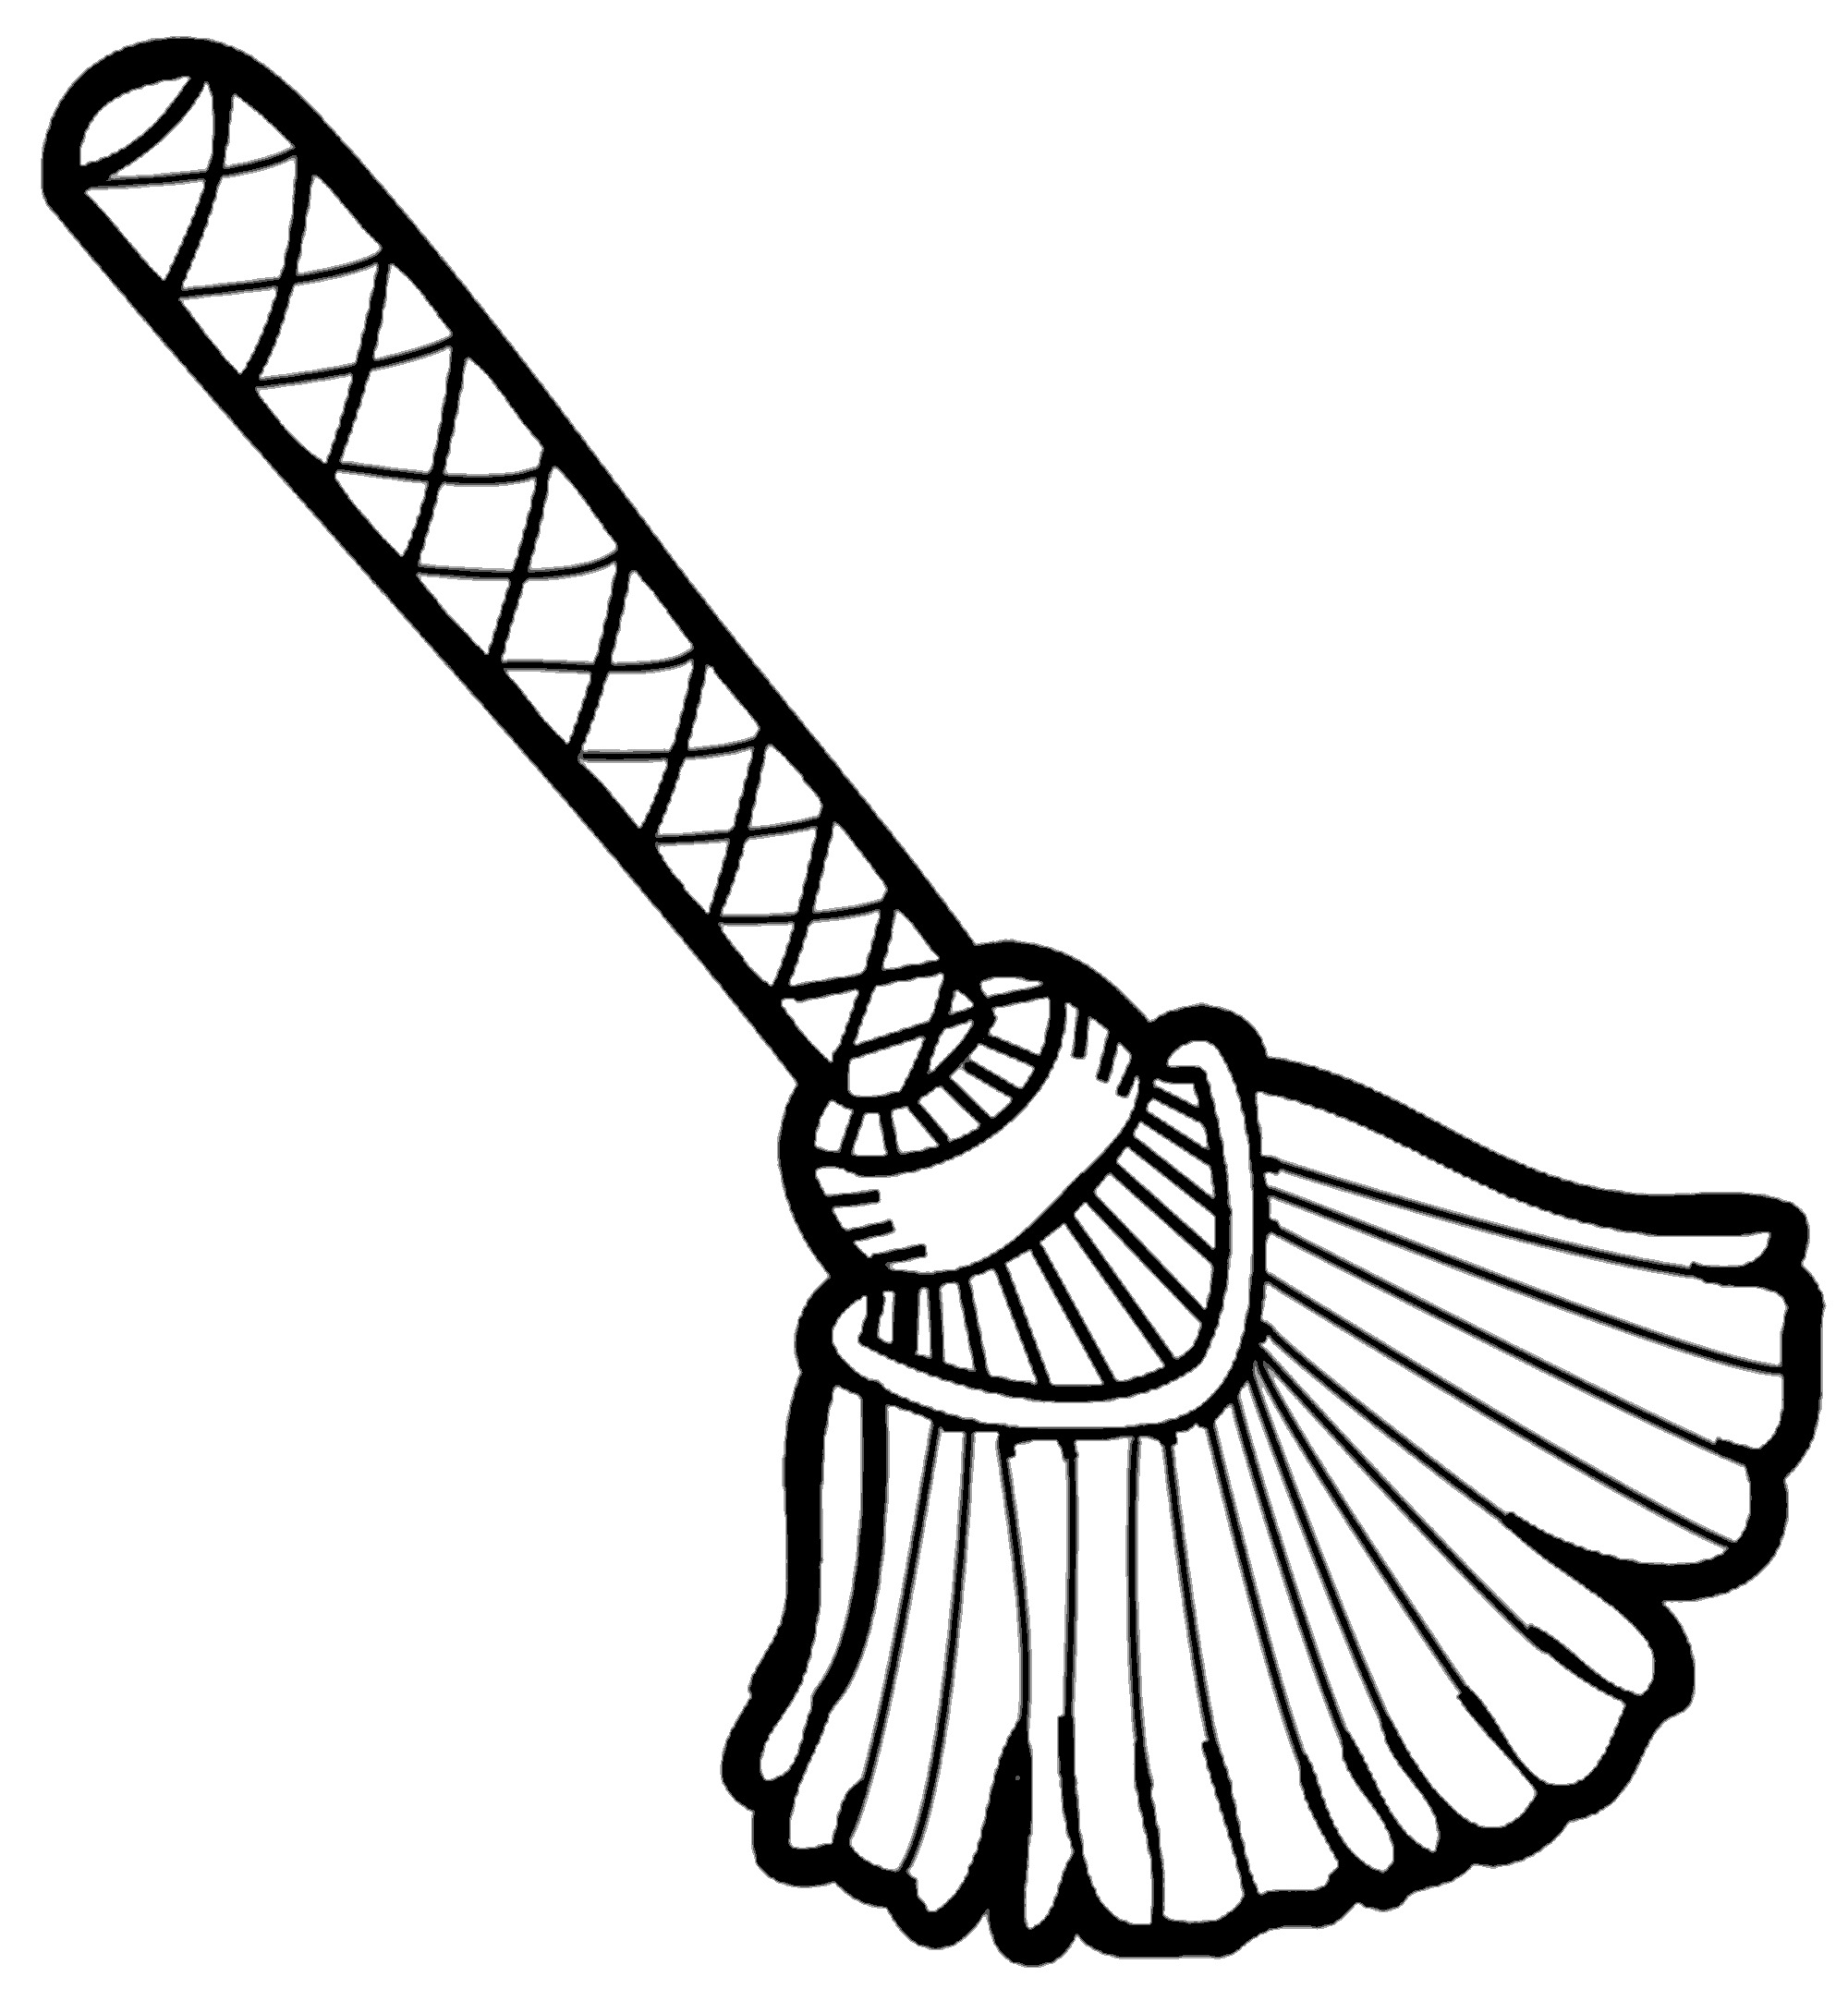 Broom Clipart Black And White | Clipart Panda - Free Clipart Images